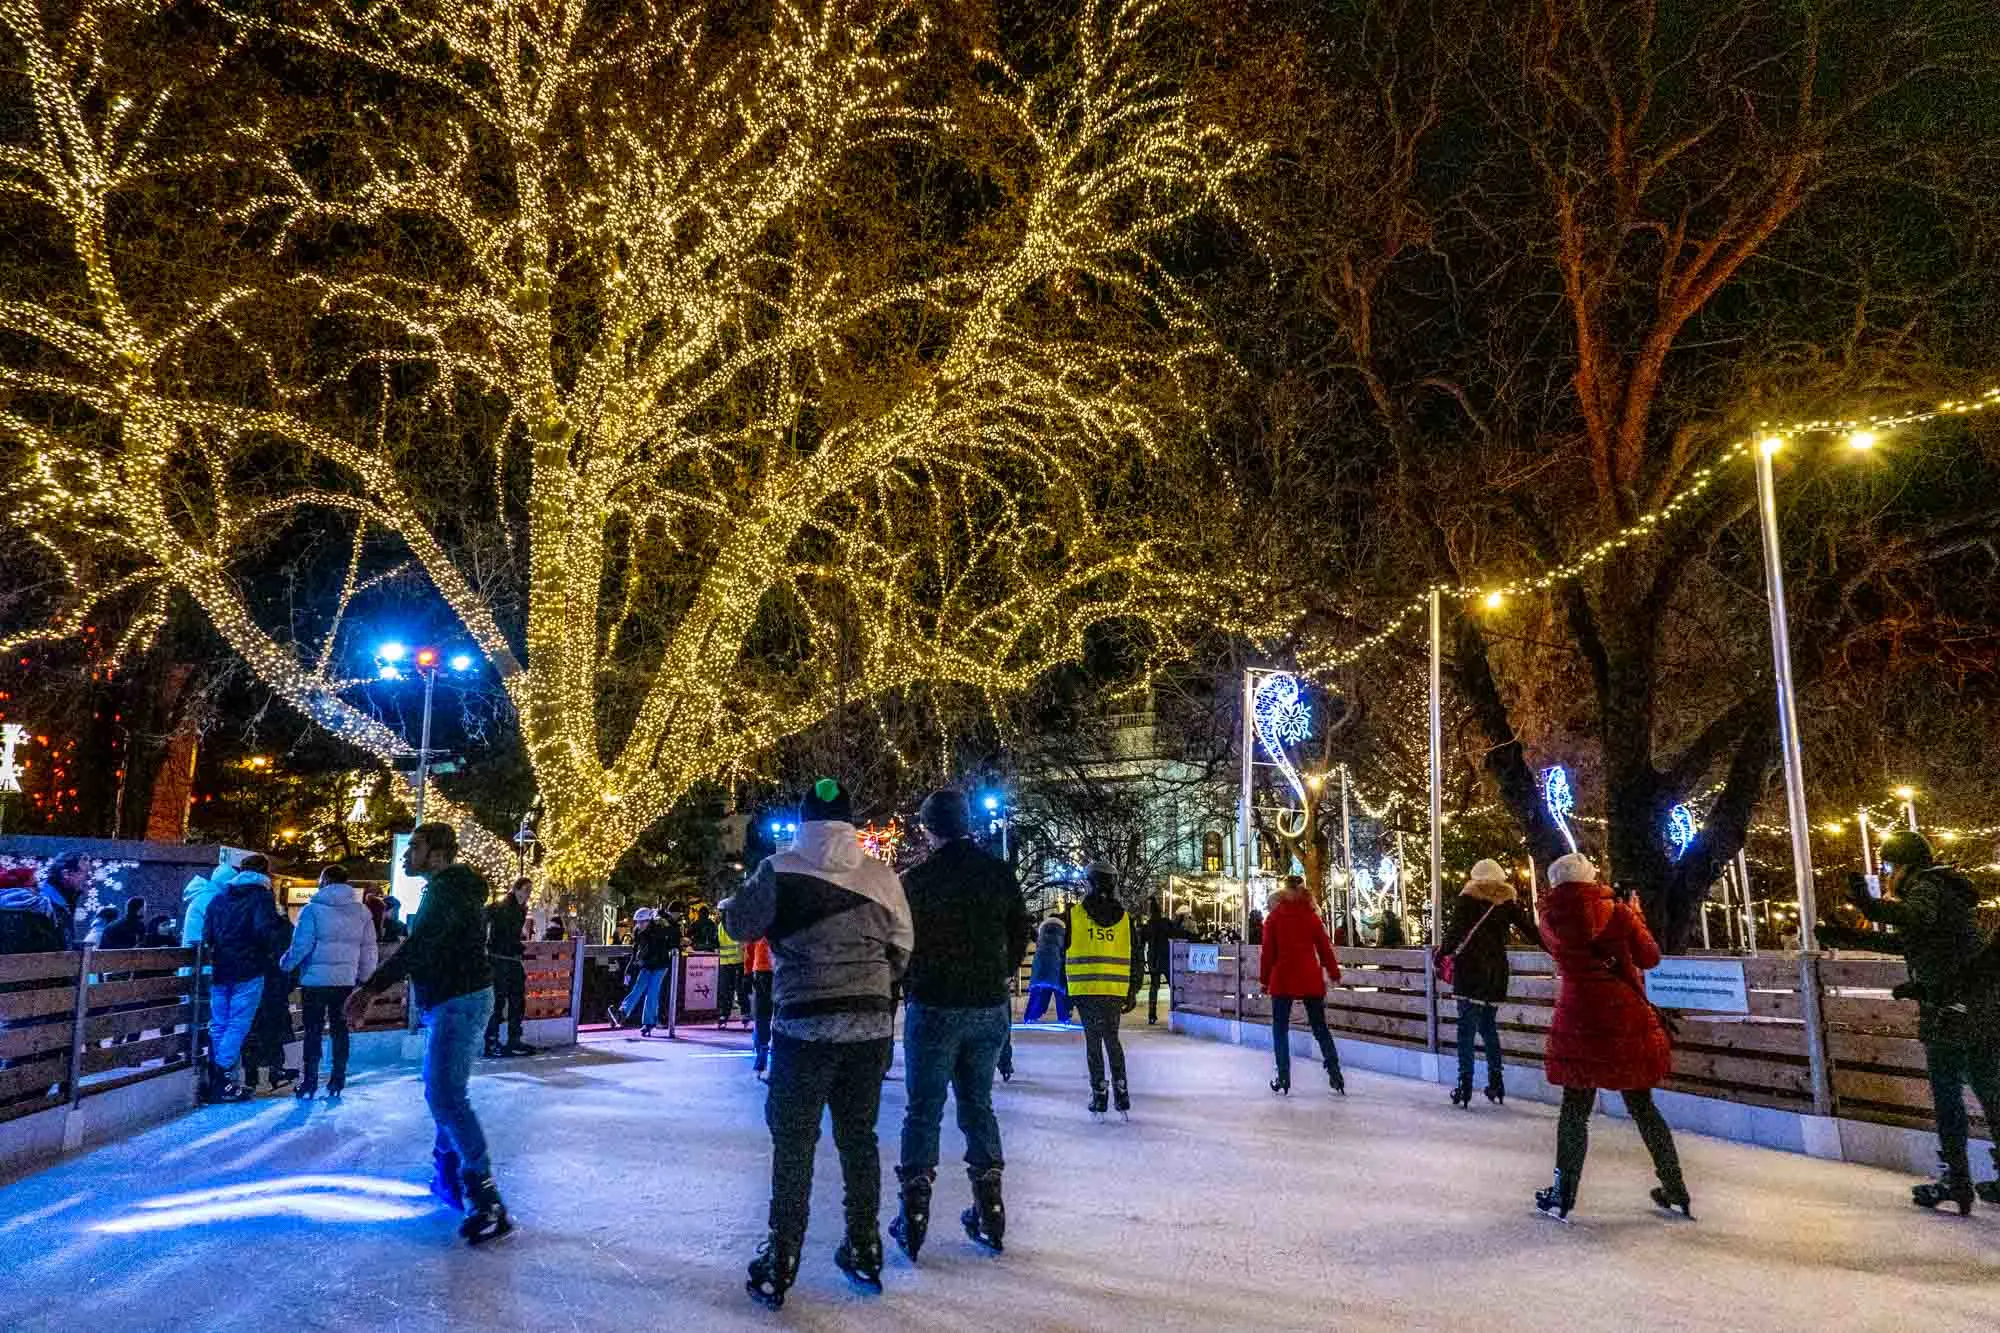 People ice skating under trees decorated with Christmas lights.